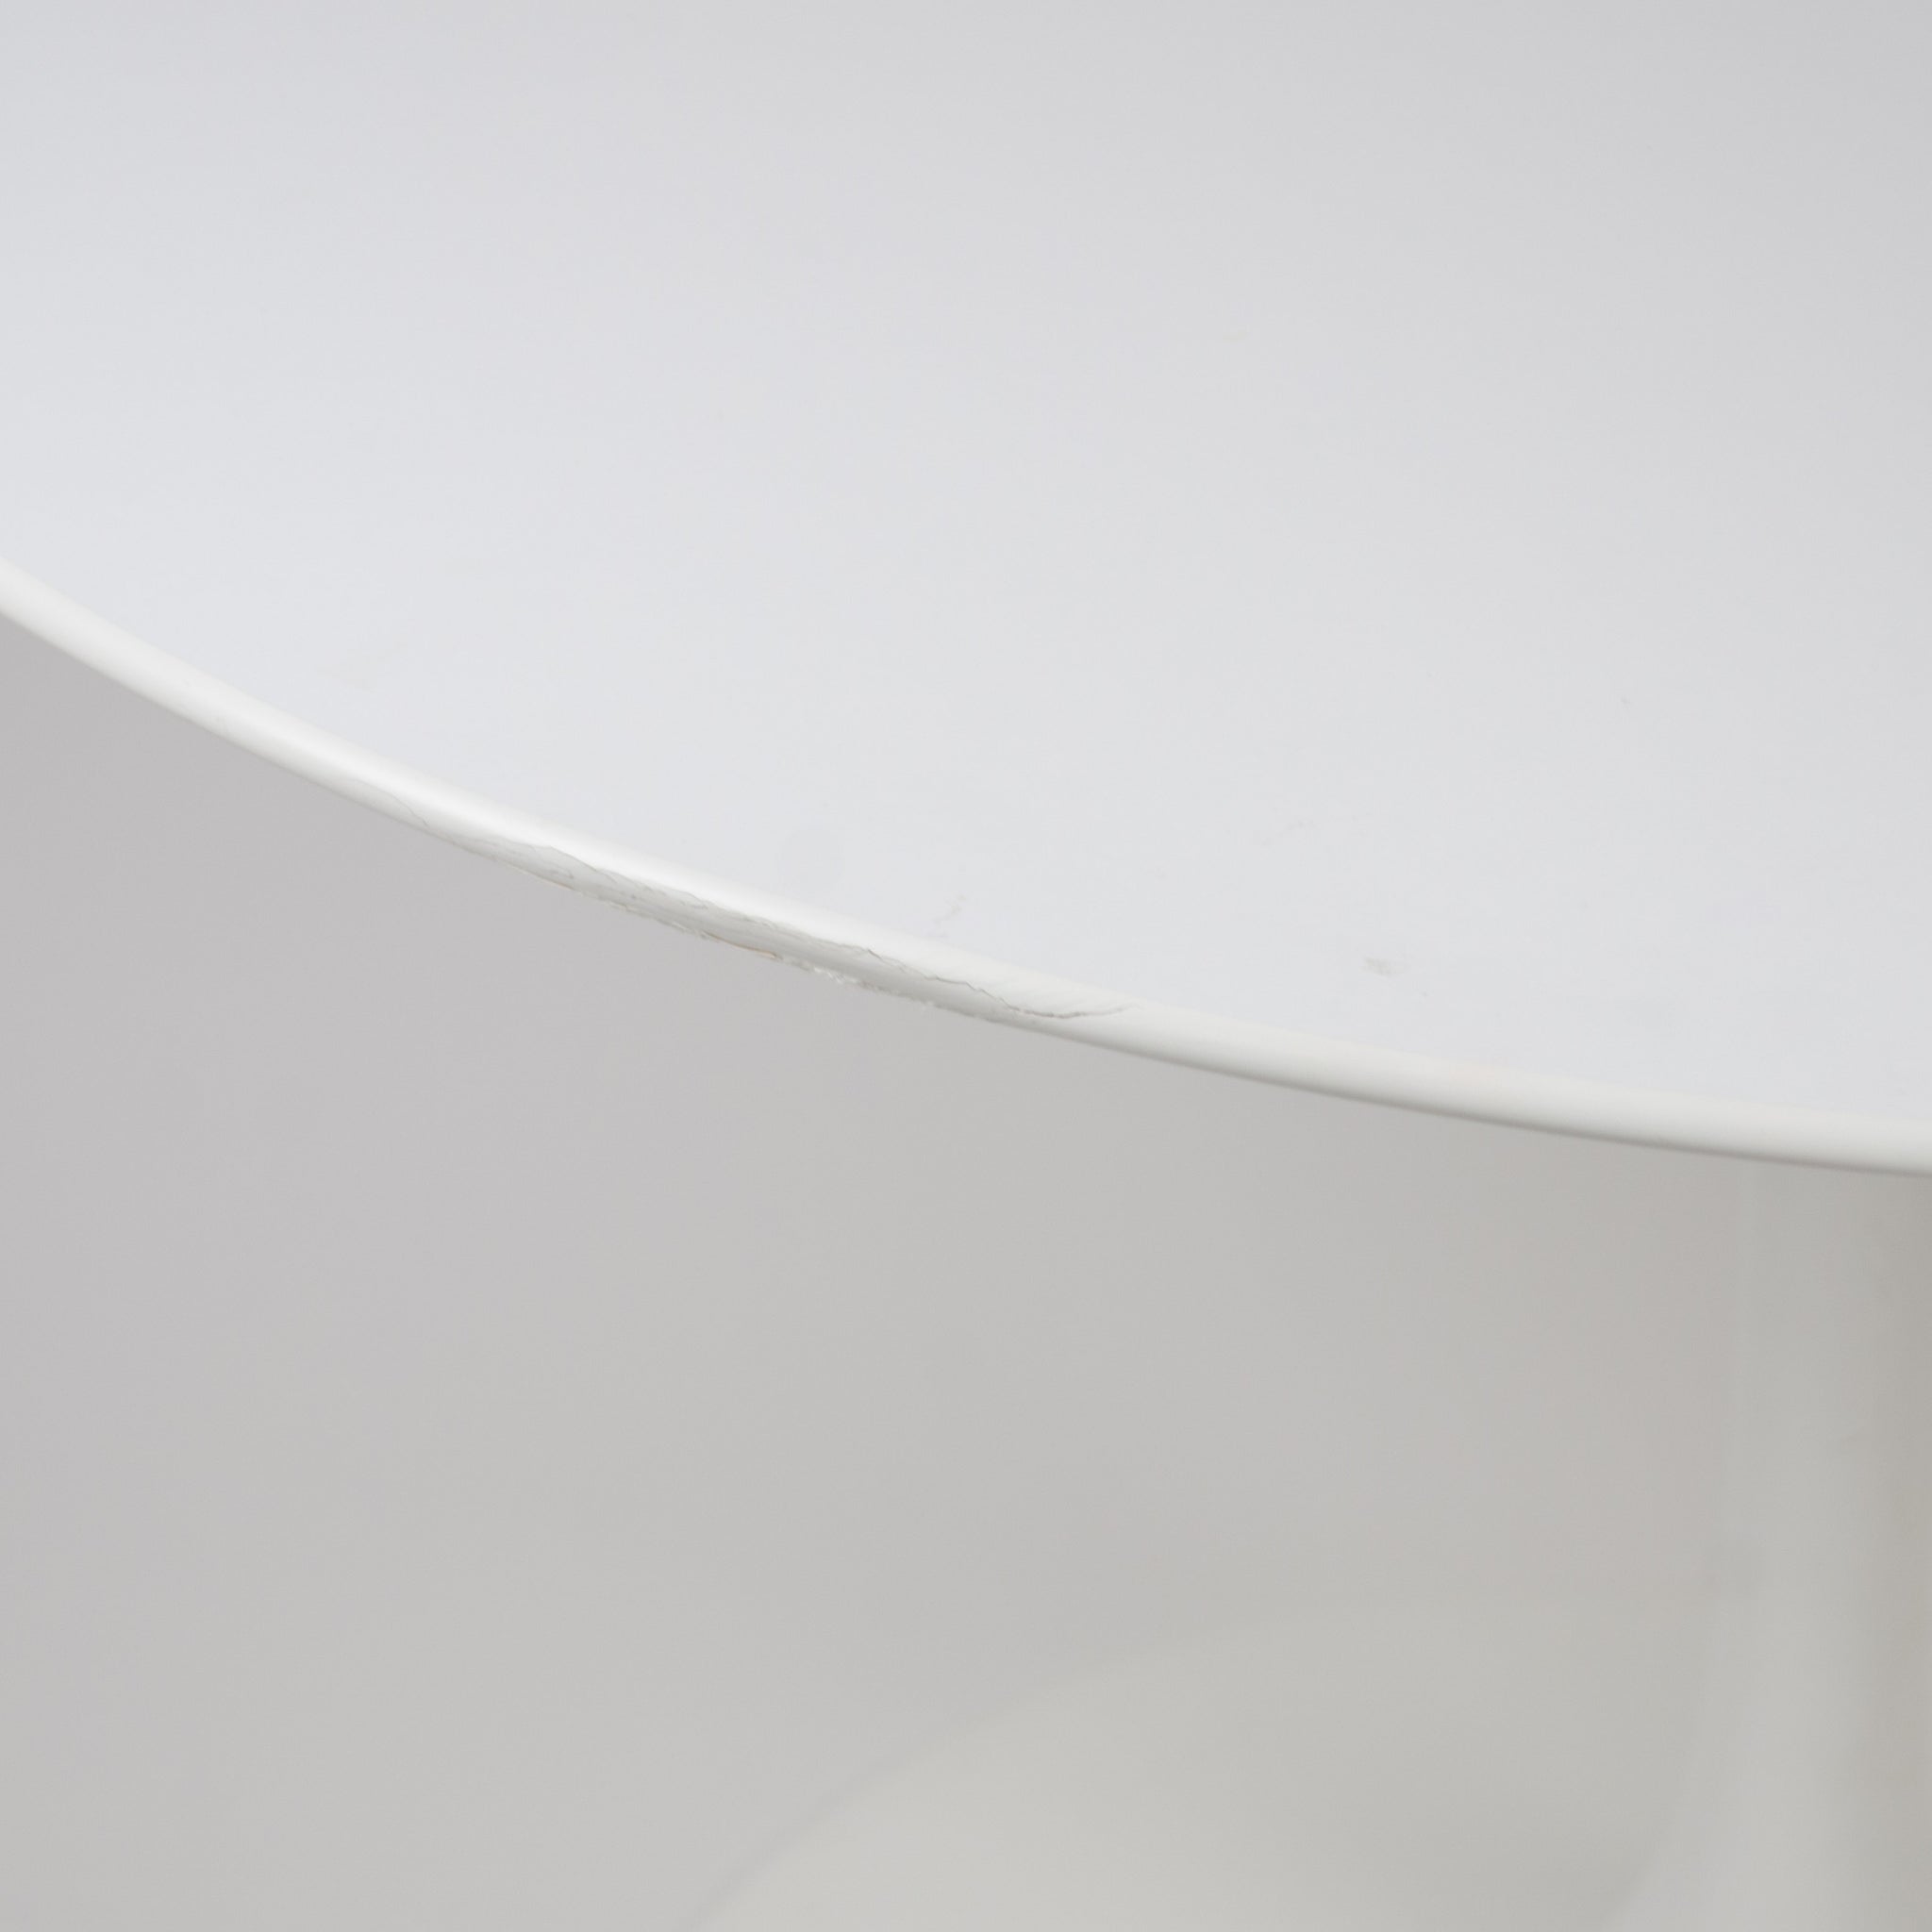 SOLD Eero Saarinen For Knoll 42 Inch Tulip Conference / Dining Table White Top 2000's